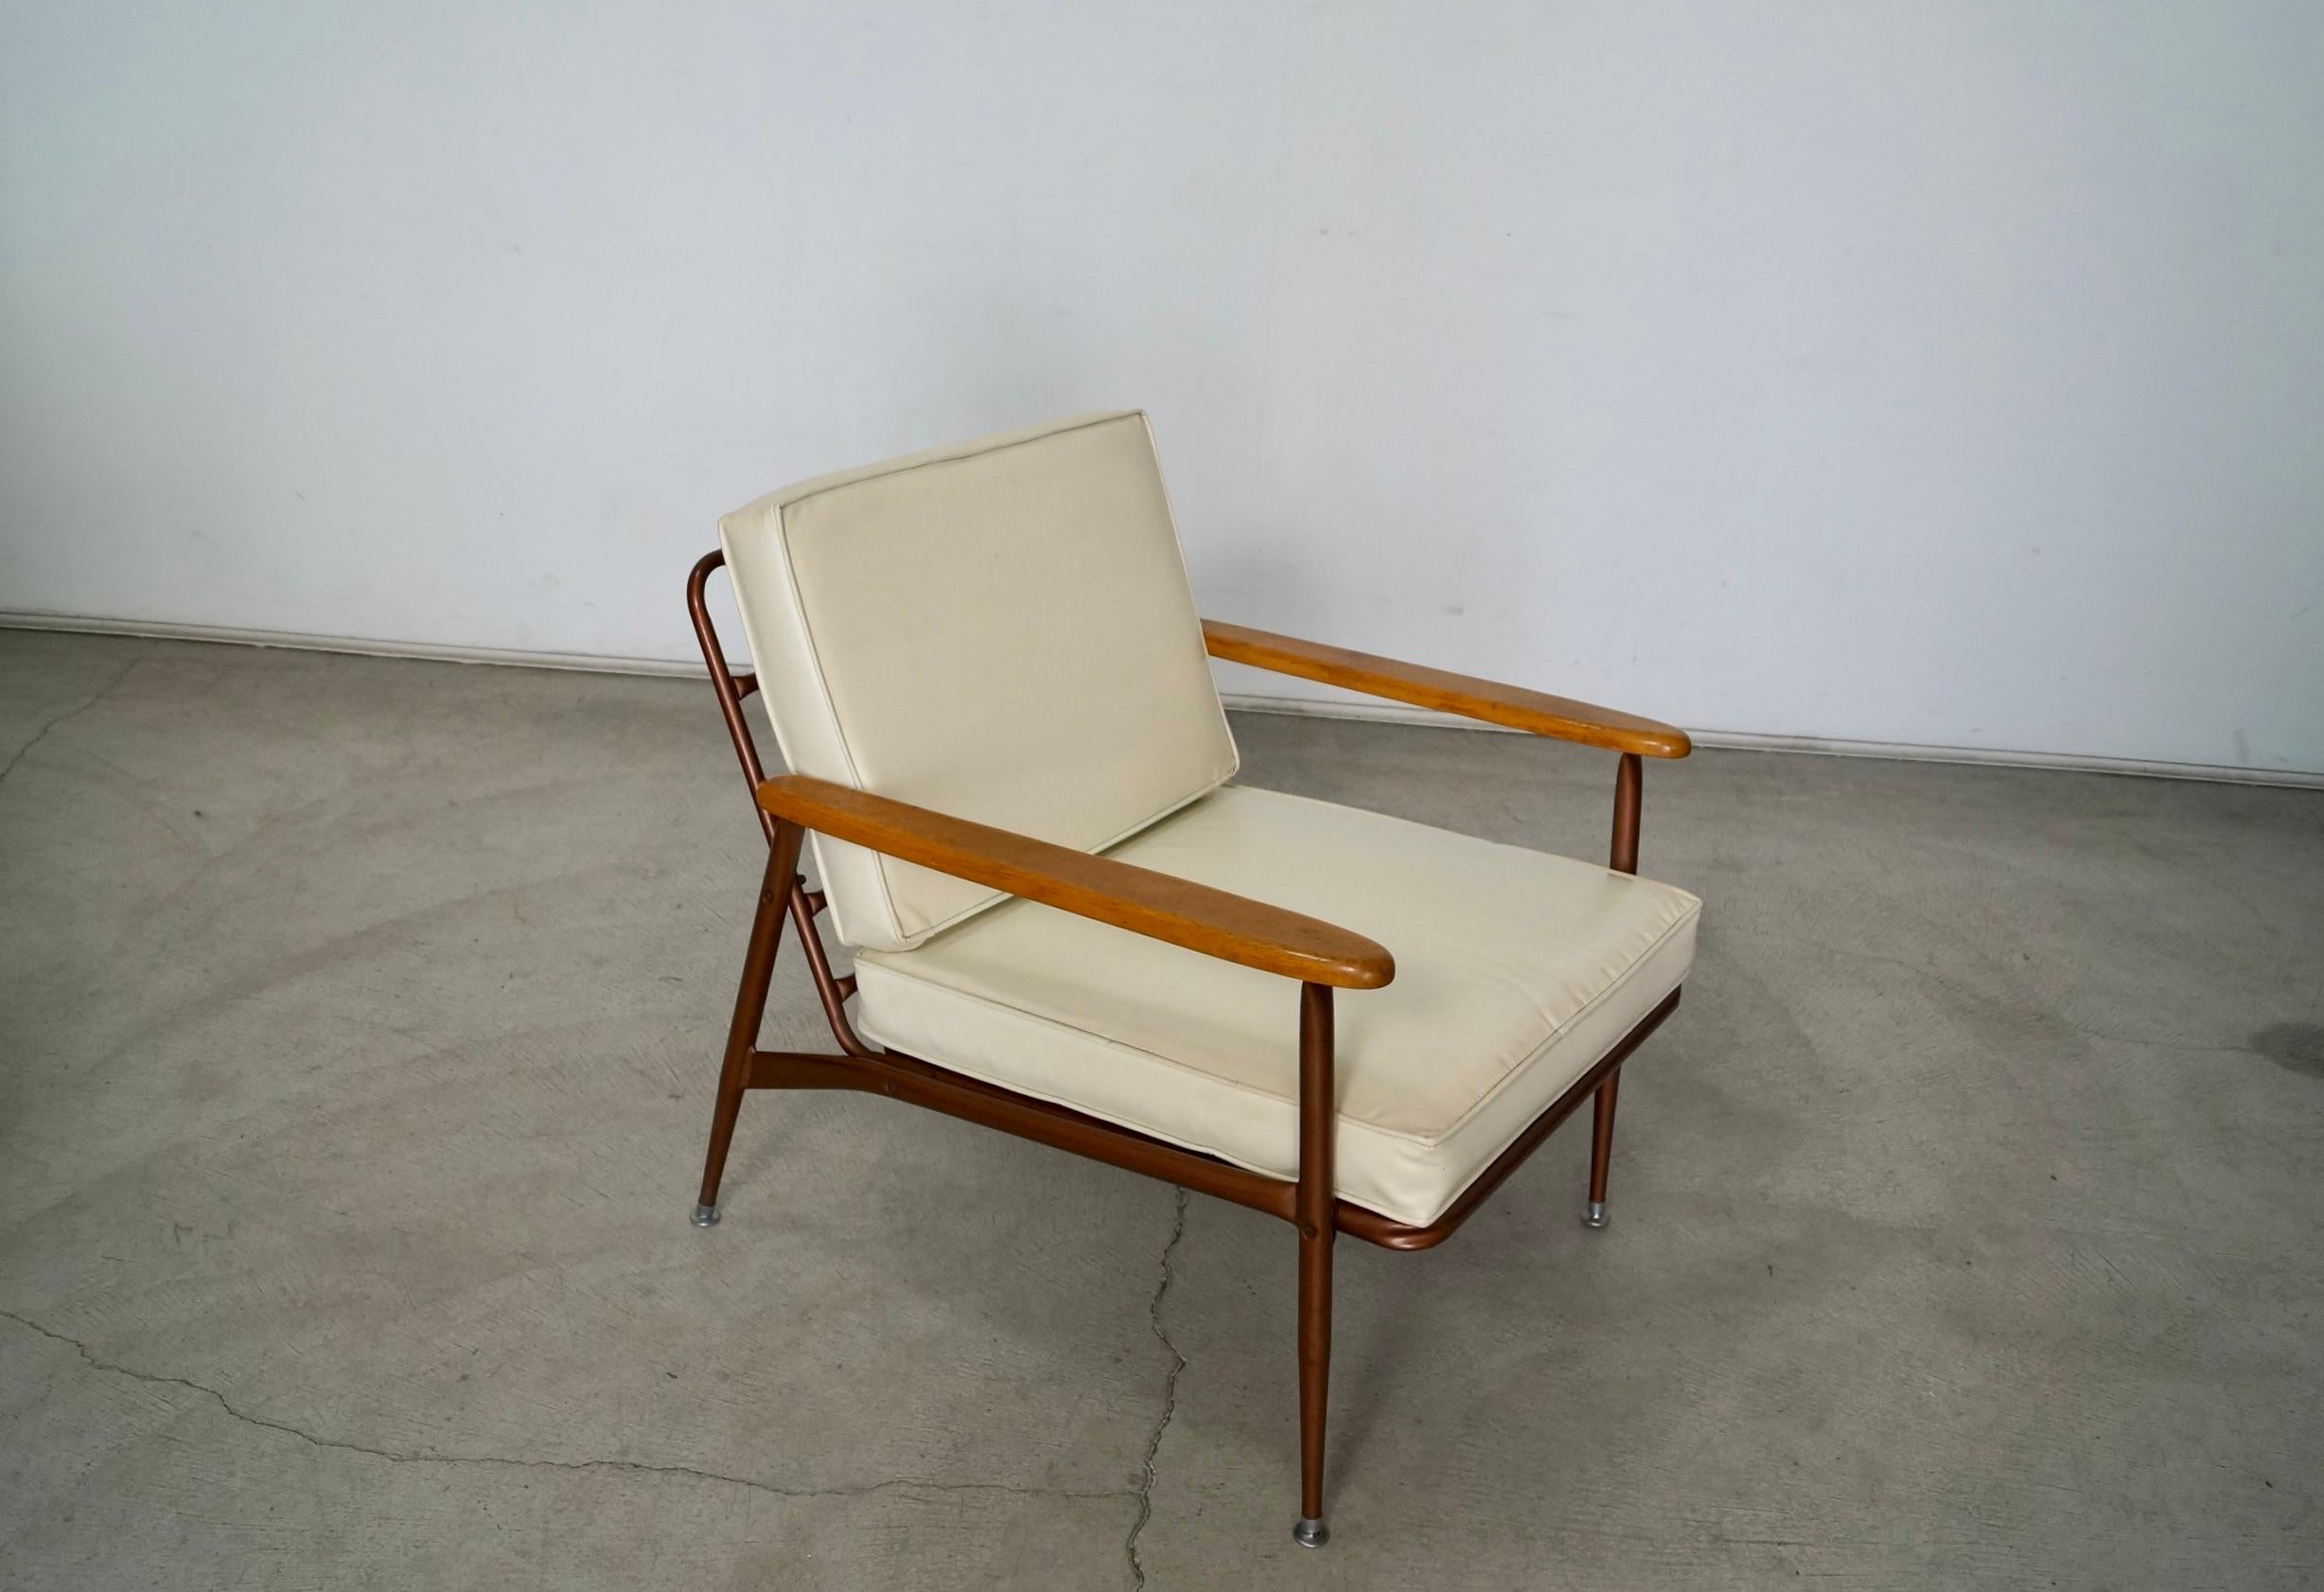 1950's Mid-Century Modern Baumritter Lounge Chair In Good Condition For Sale In Burbank, CA